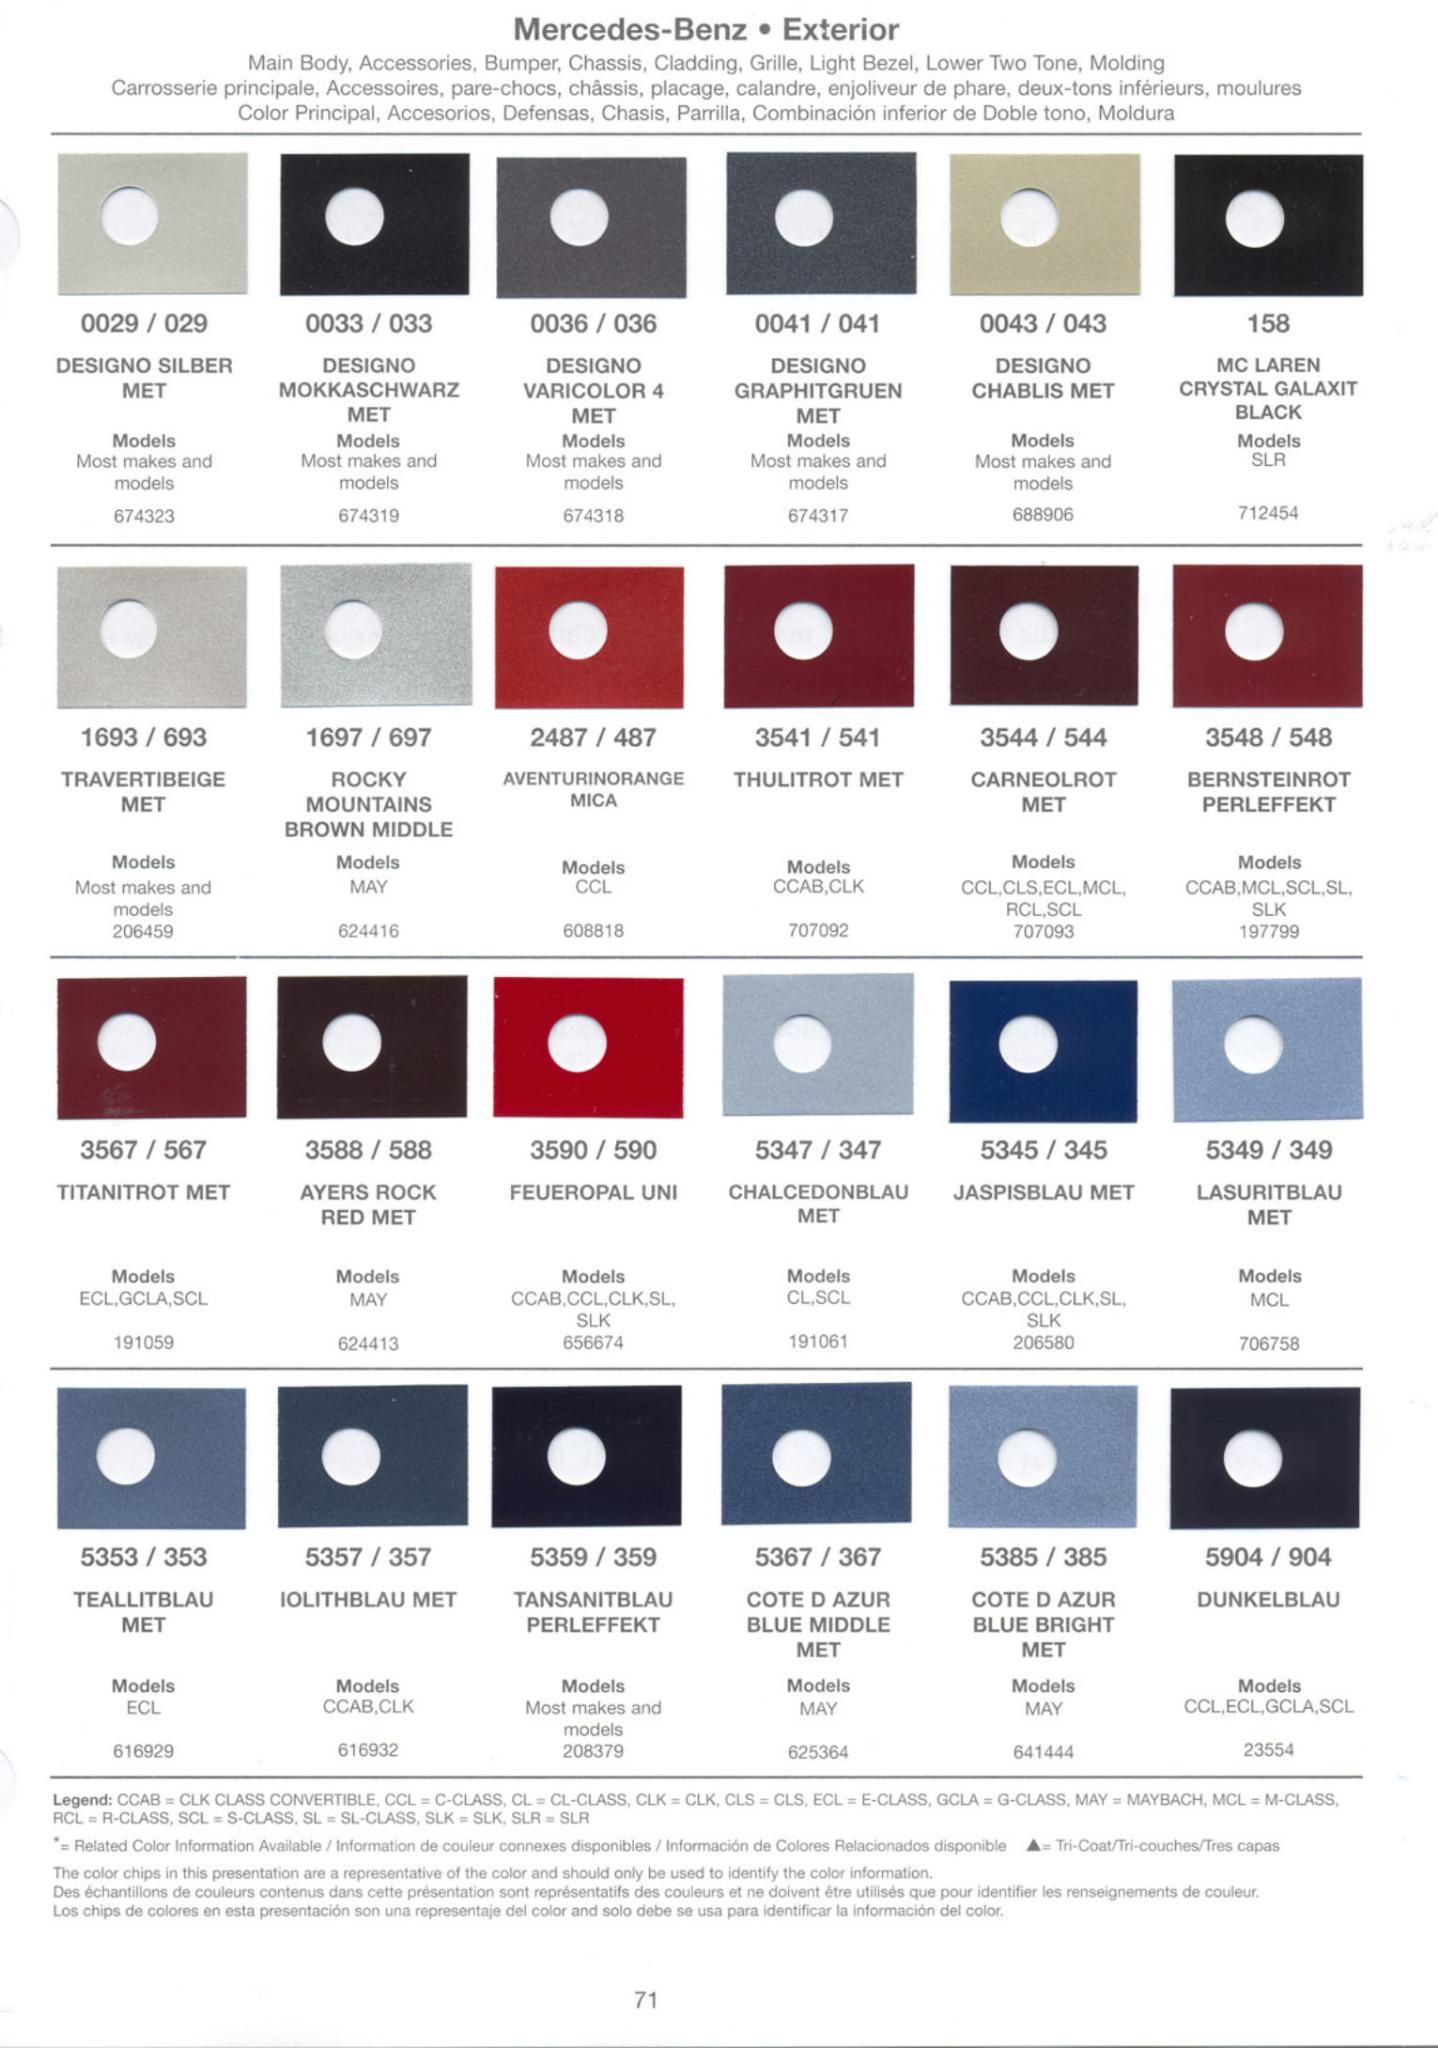 paint codes, color names, vehicles that the colors where used on & Stock numbers for 2006 Mercedes Benz vehicles